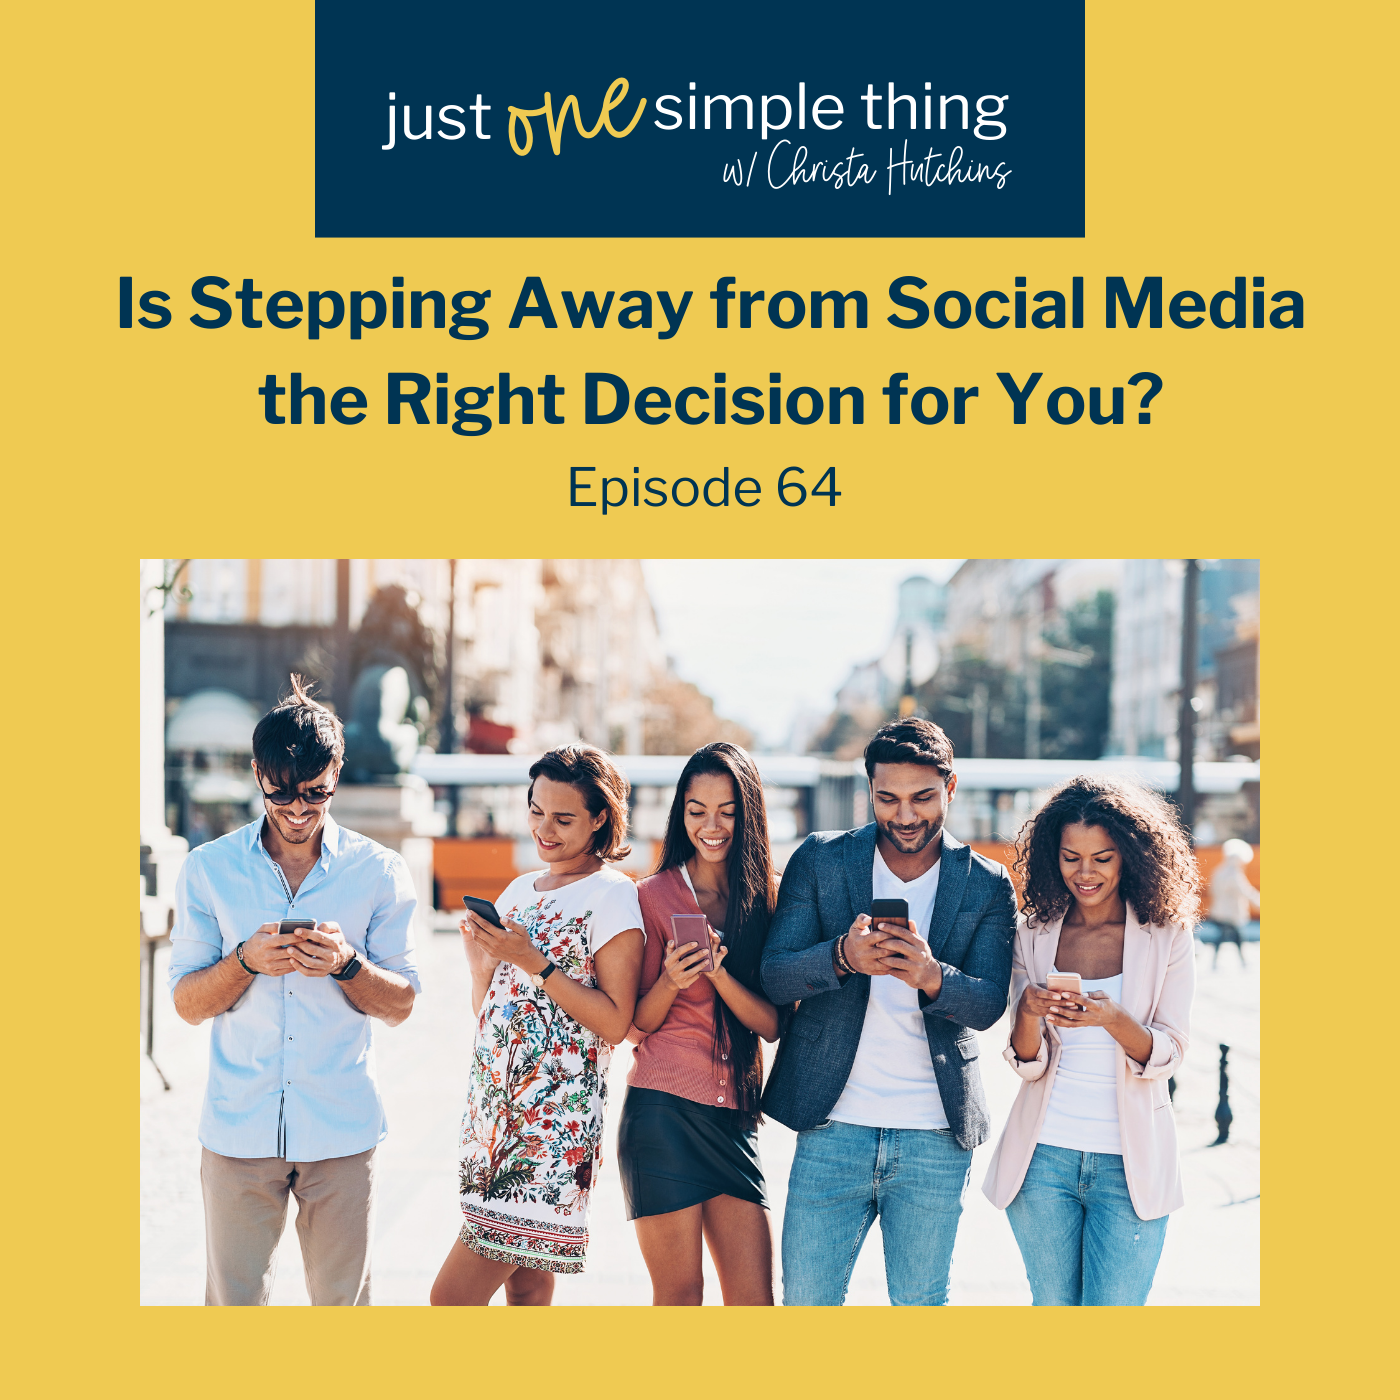 Is Stepping Away from Social Media the Right Decision for You?